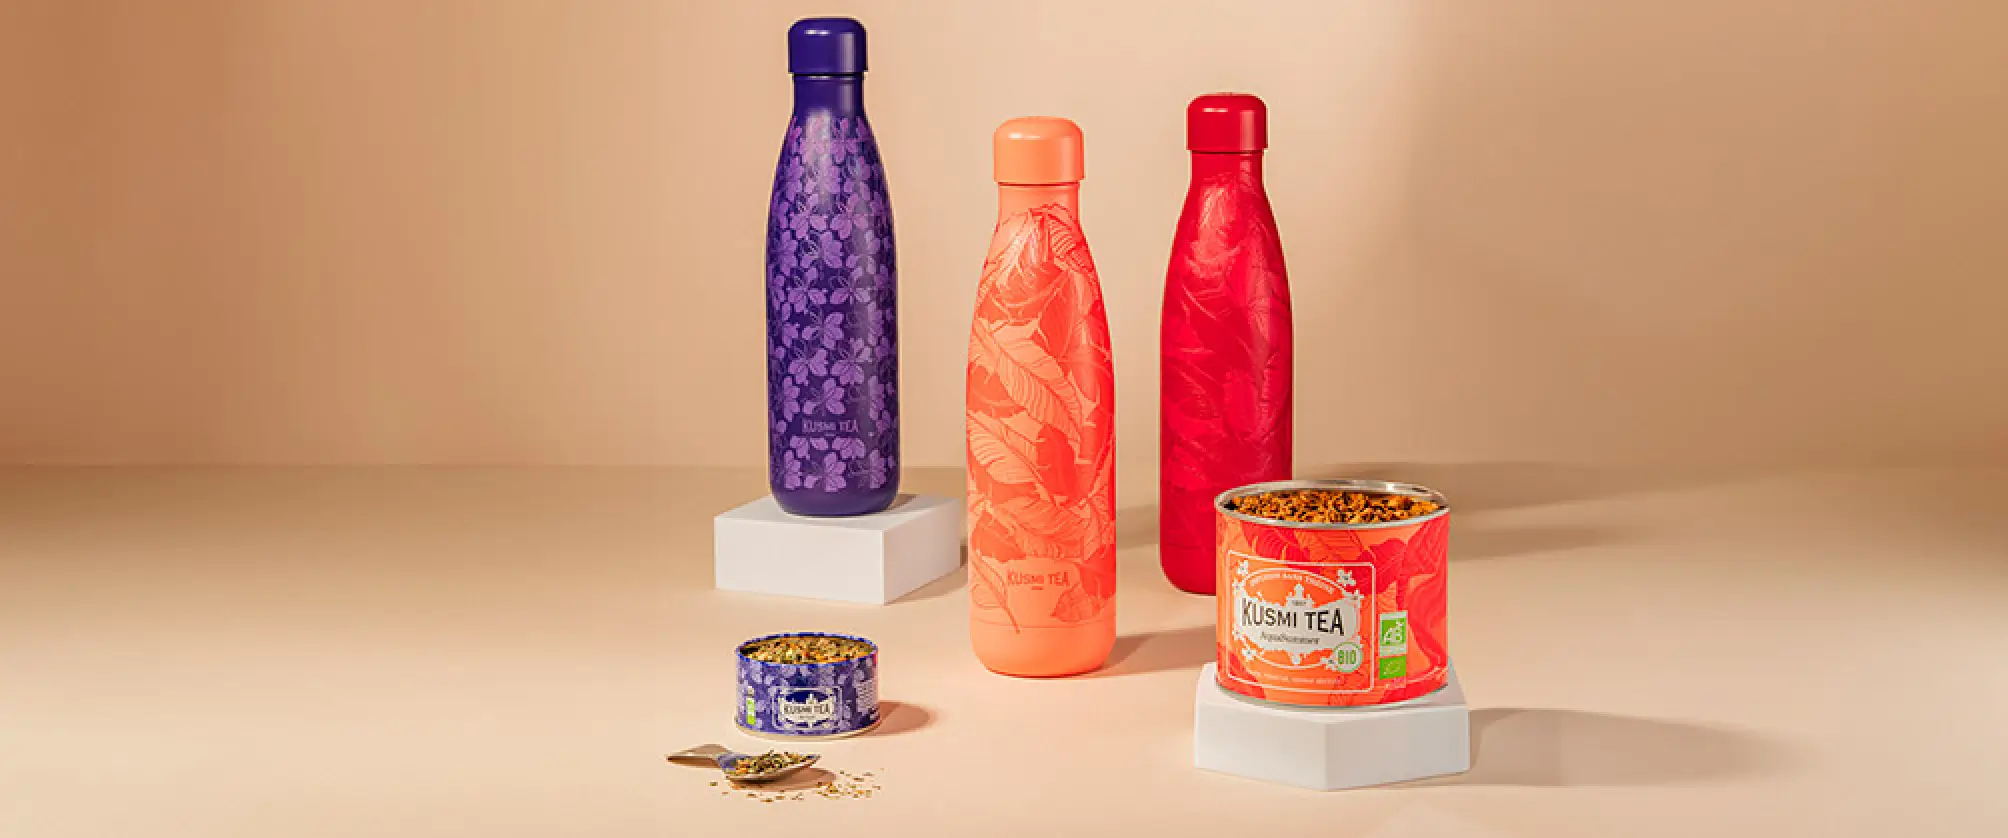 Click on "Discover now" to discover our colorful Kusmi Tea Bottles